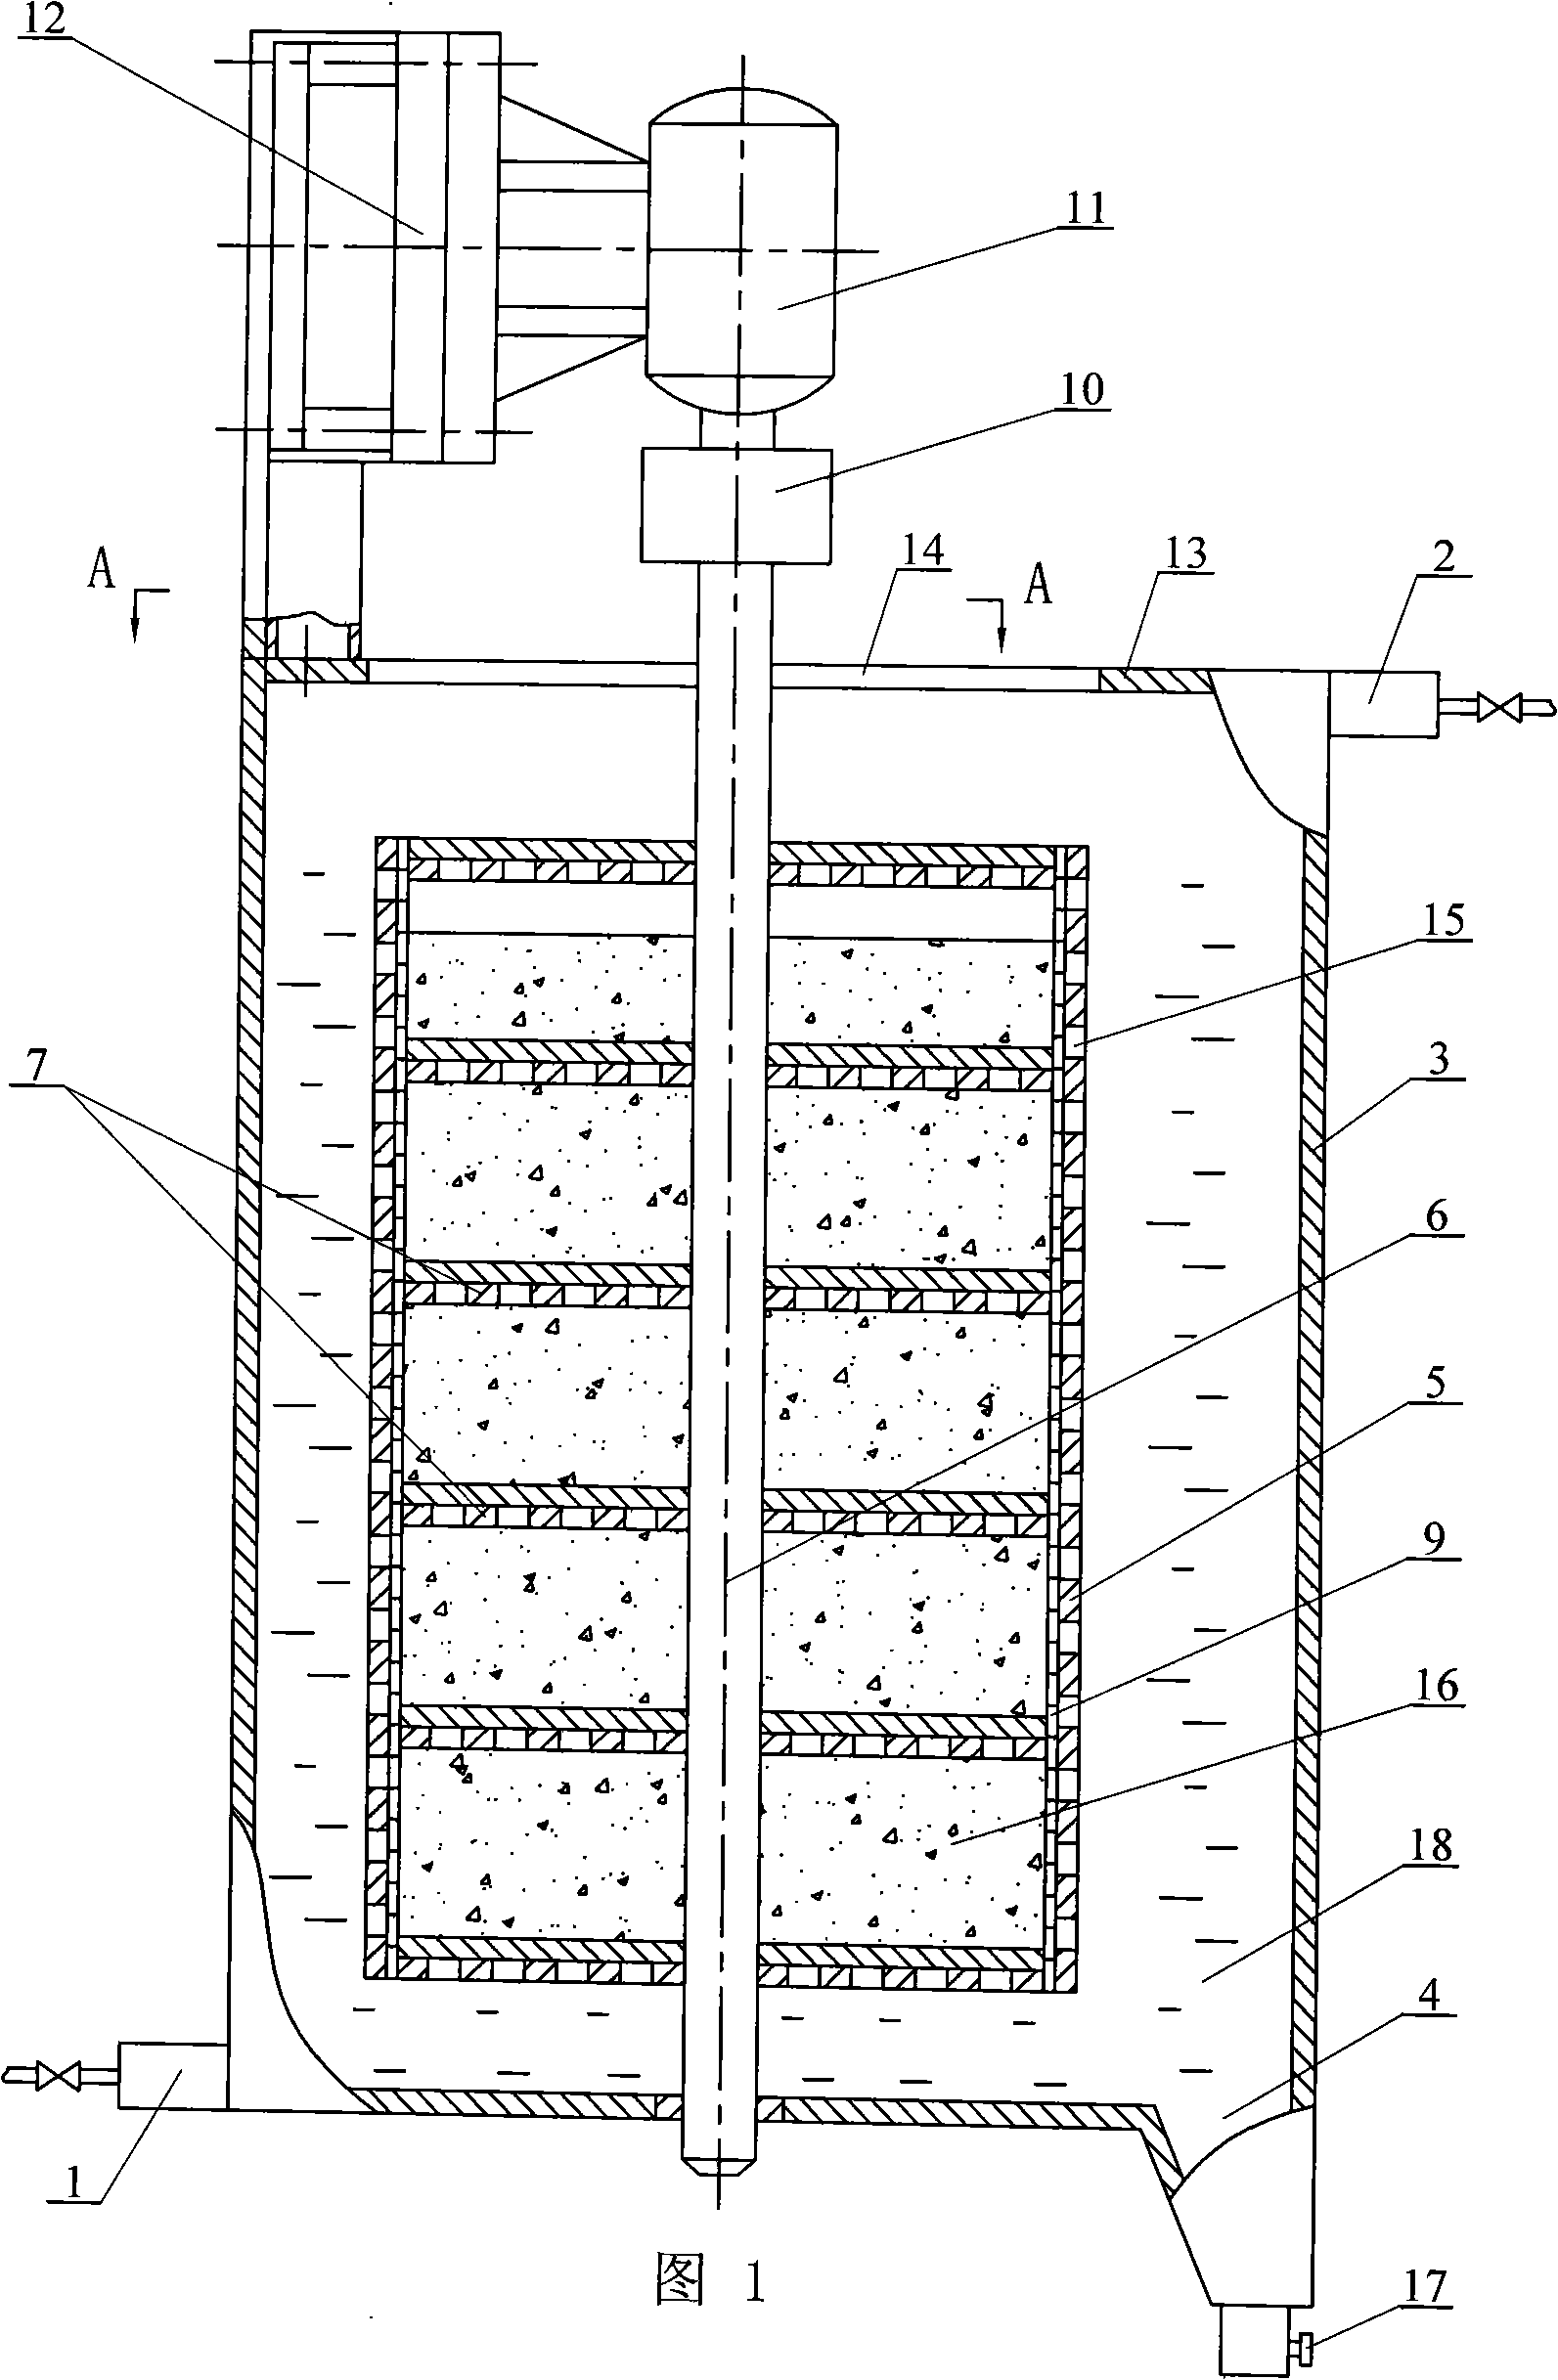 Highly effective pretreatment apparatus for refractory dyeing waste water